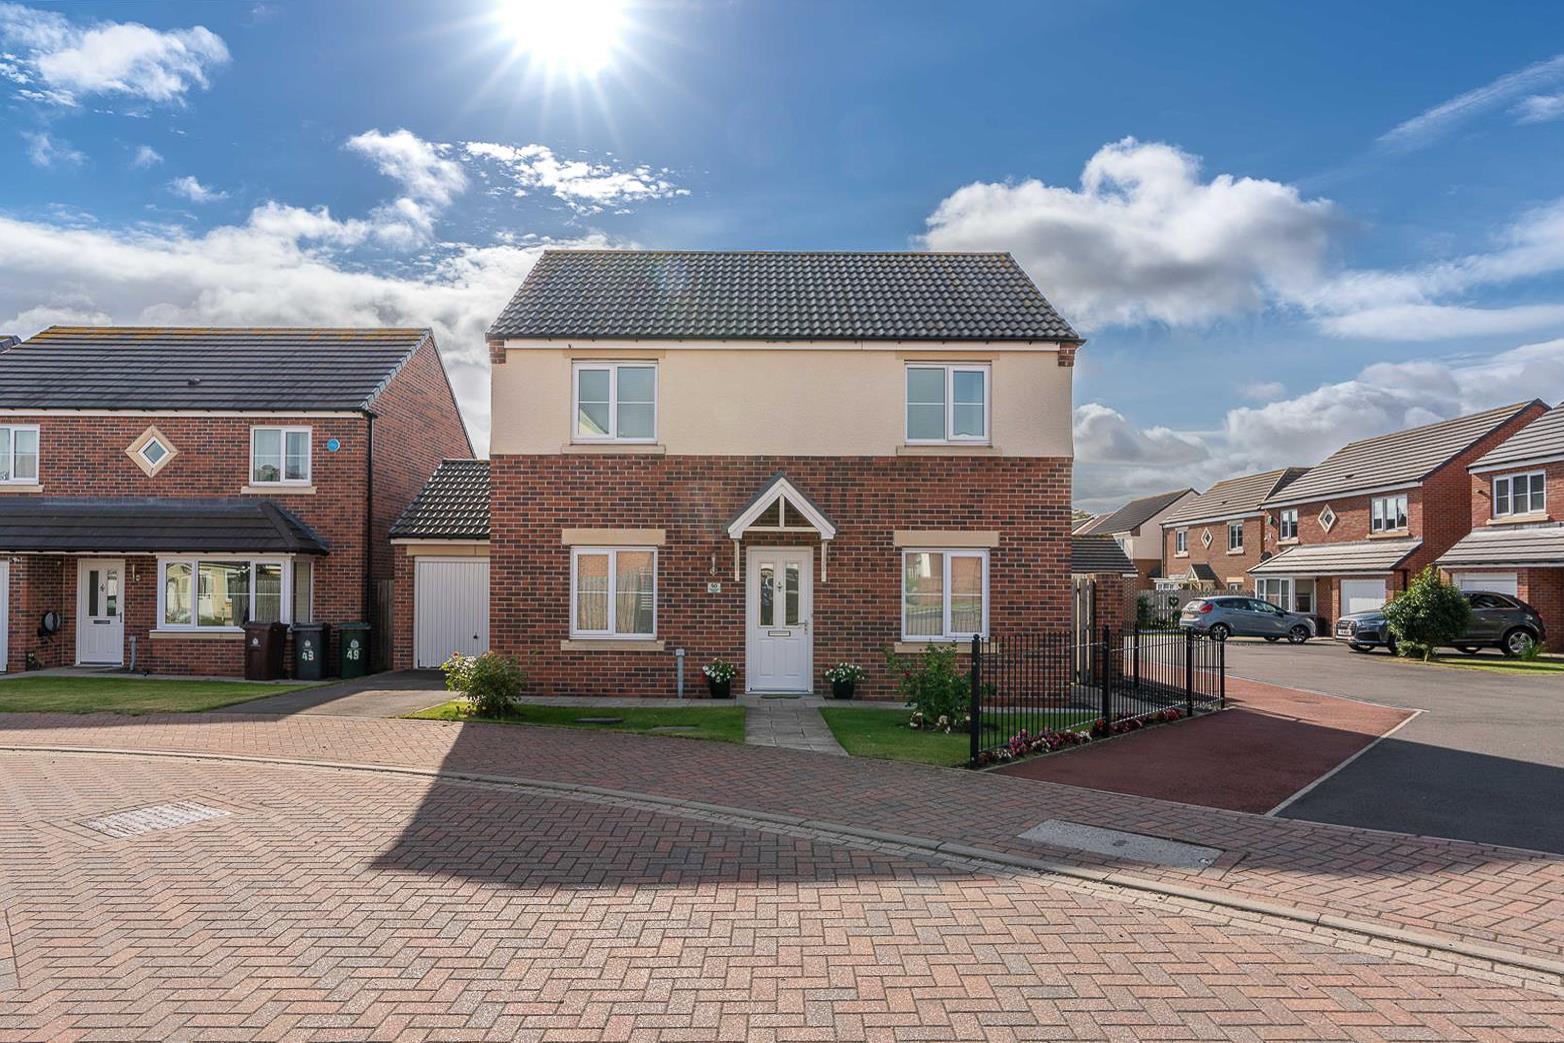 3 bed detached house for sale in Dunnock Place, Wideopen - Property Image 1